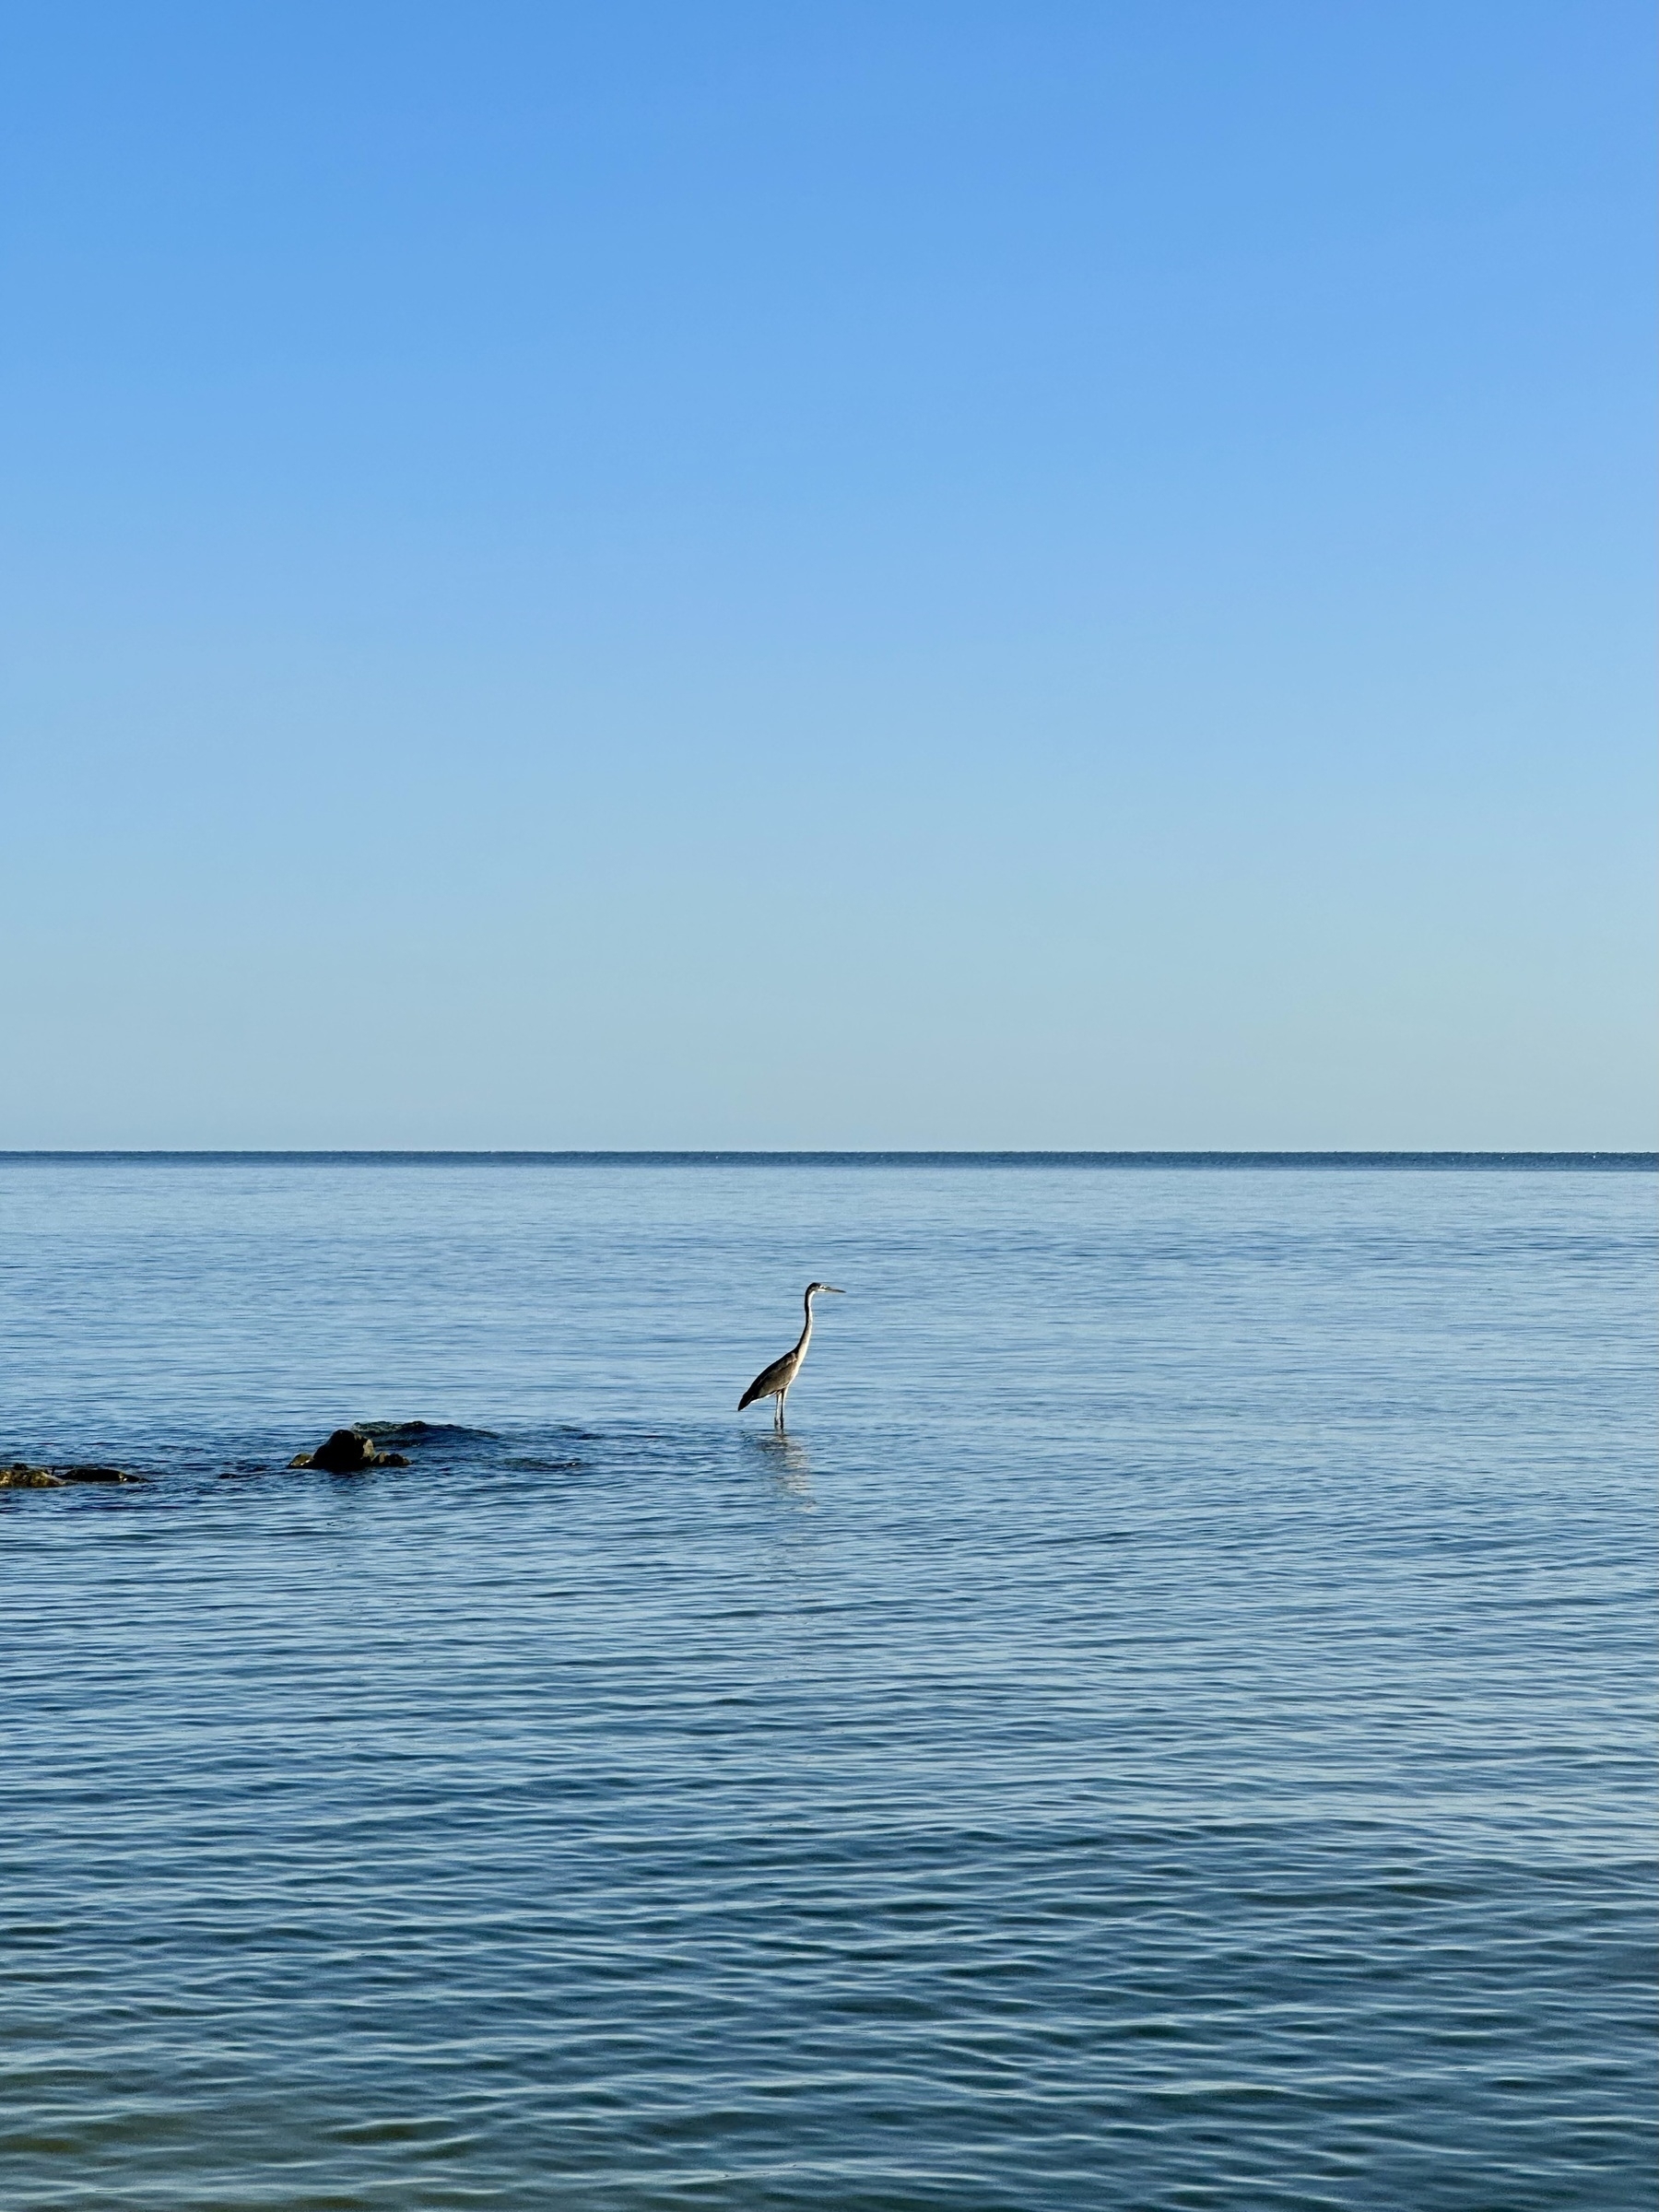 A lonely great blue heron standing in water under a clear blue sky.